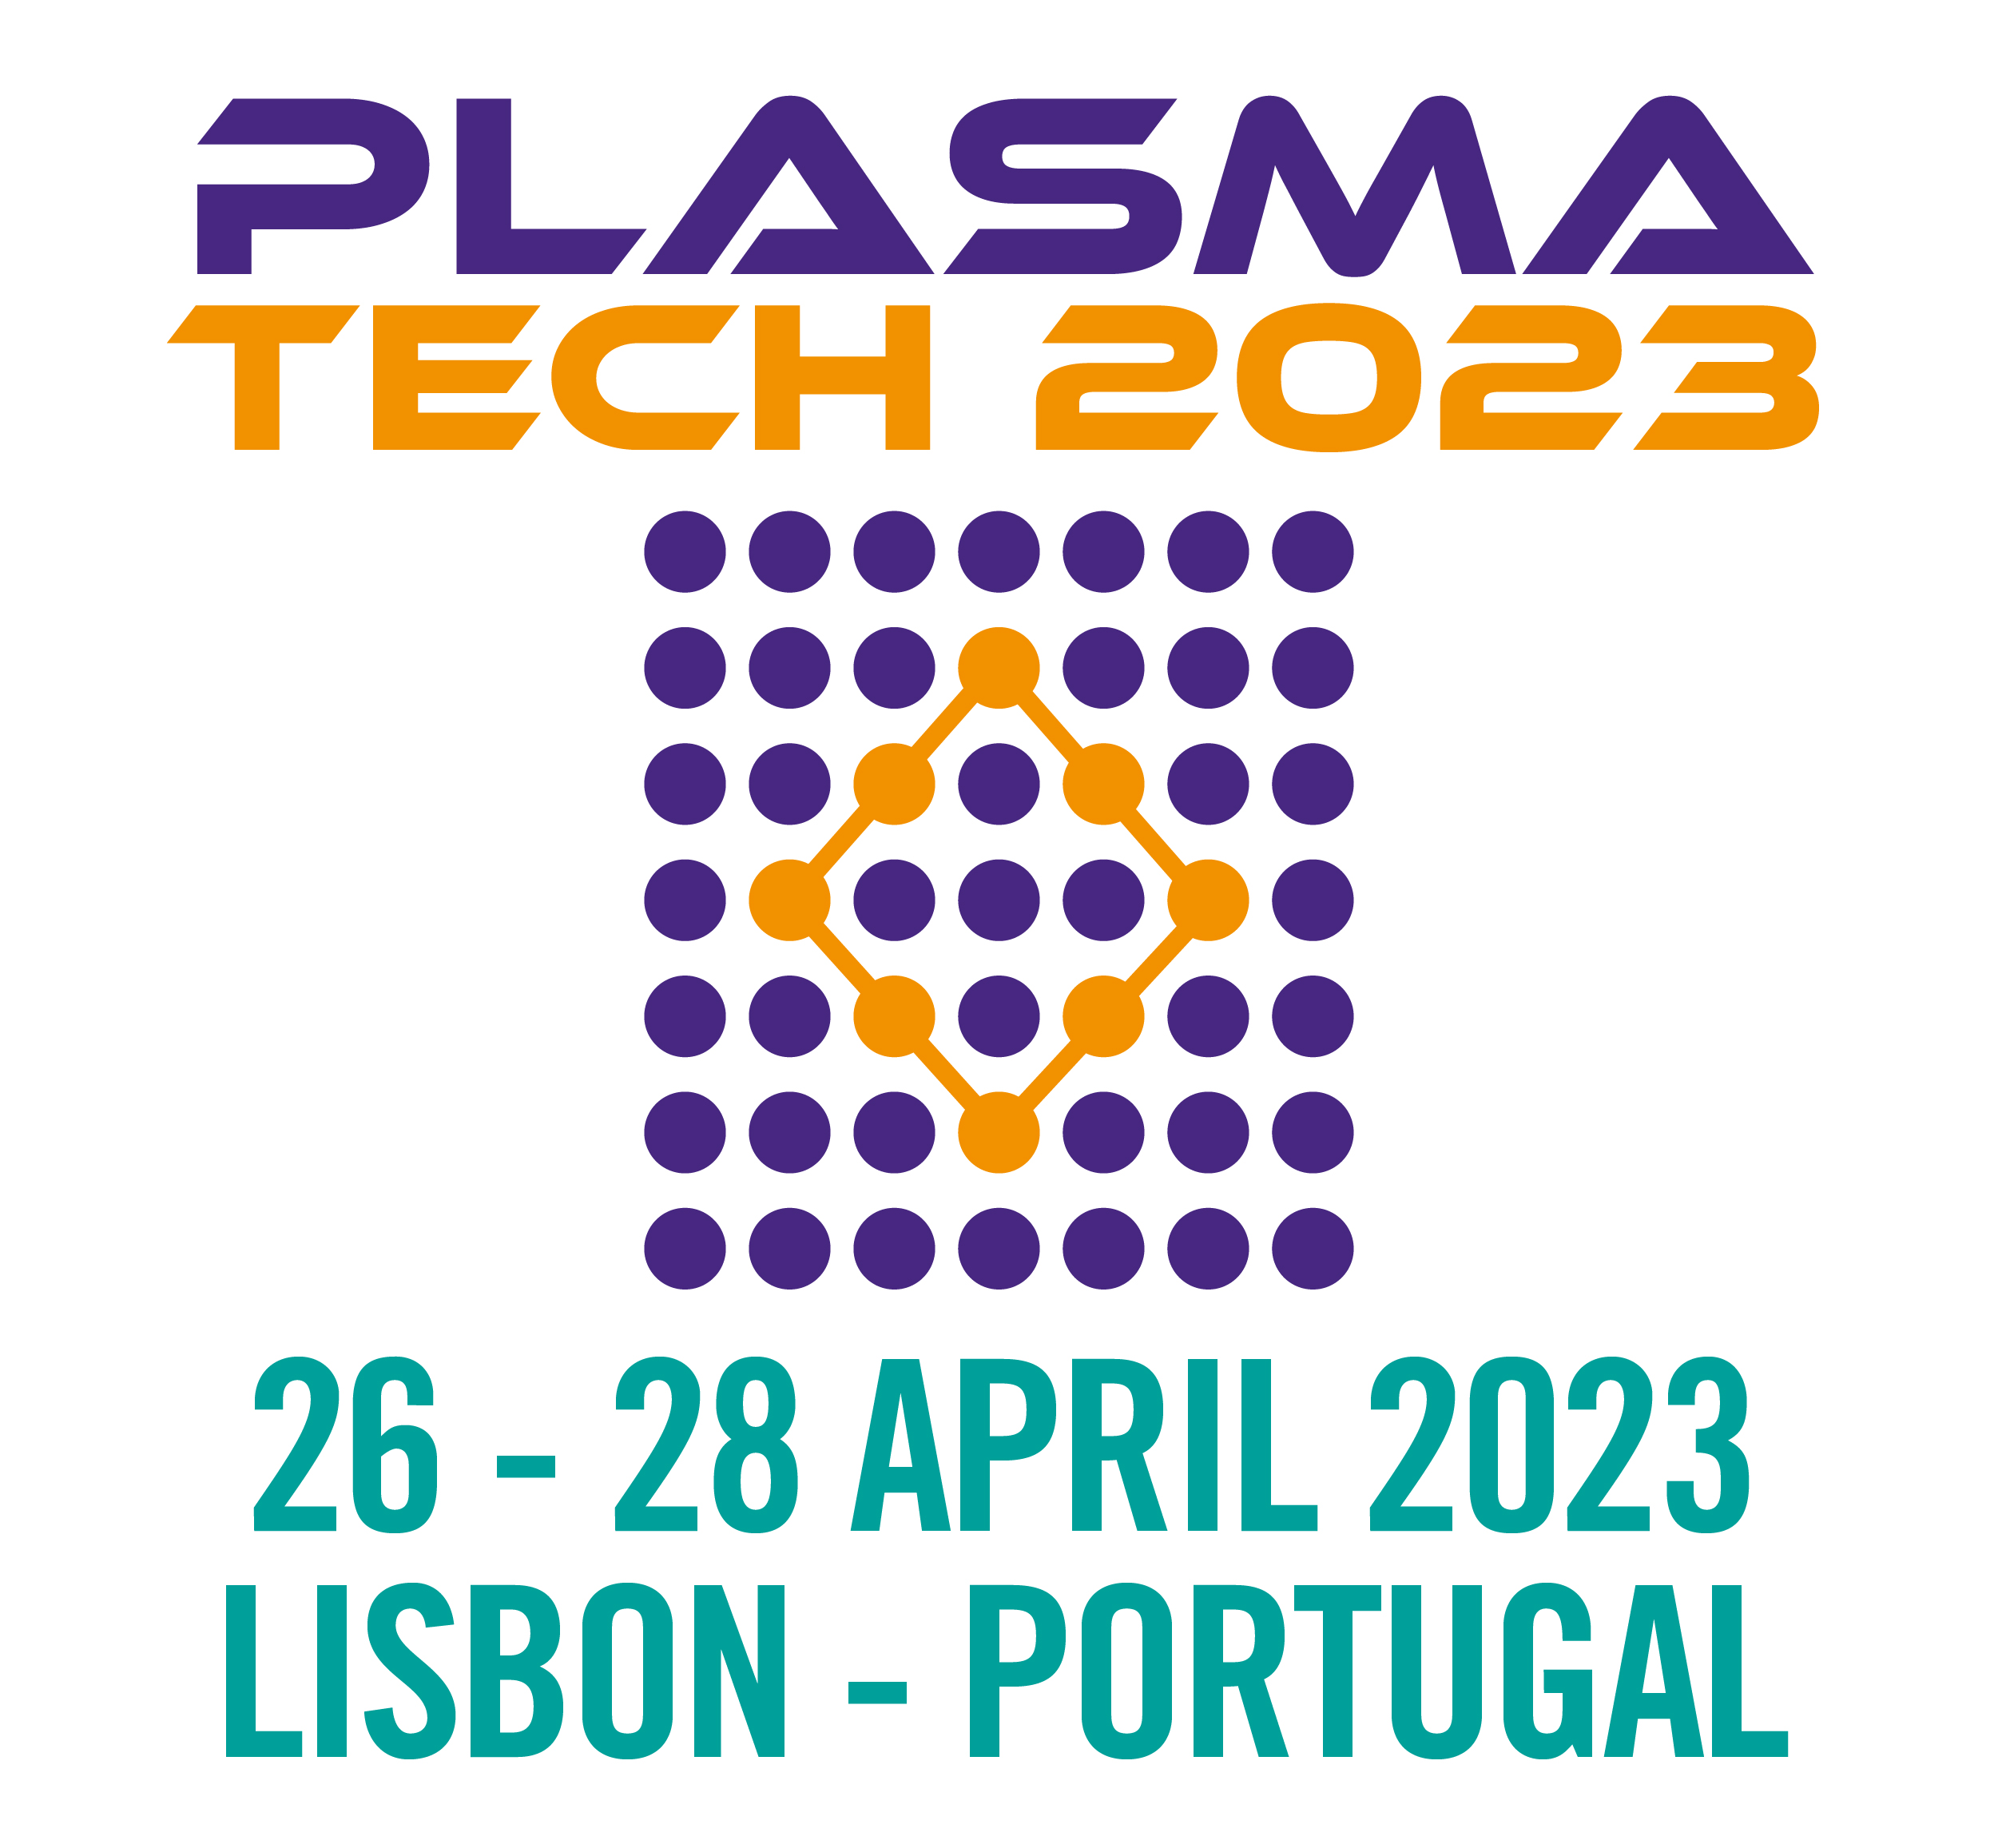 Plasma Processing and Technology International Conference 2023